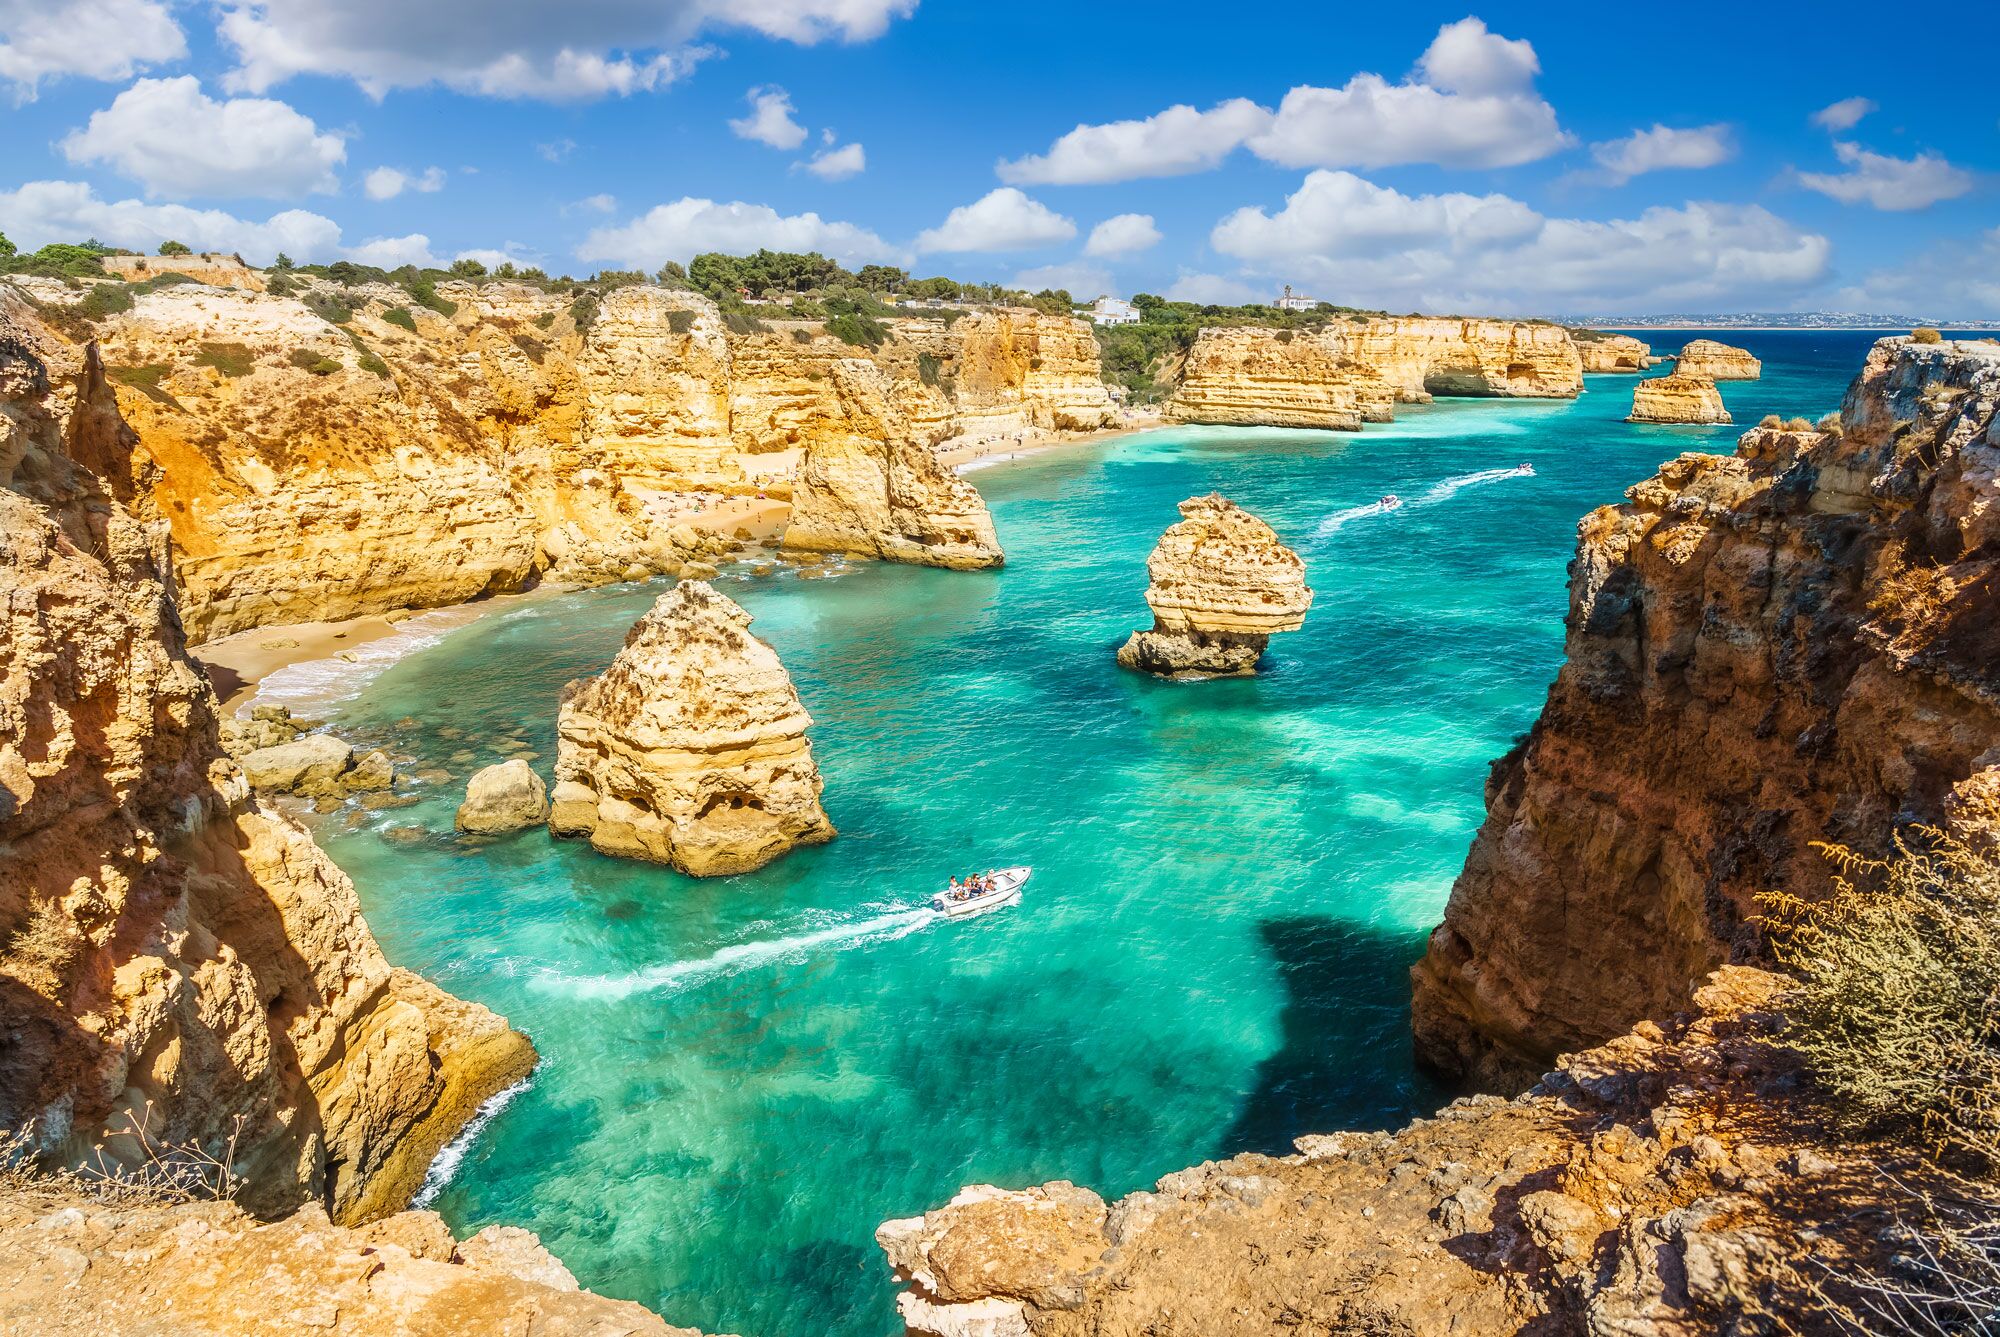 Best hotels and holiday homes near the beaches of the Algarve (35 tips)